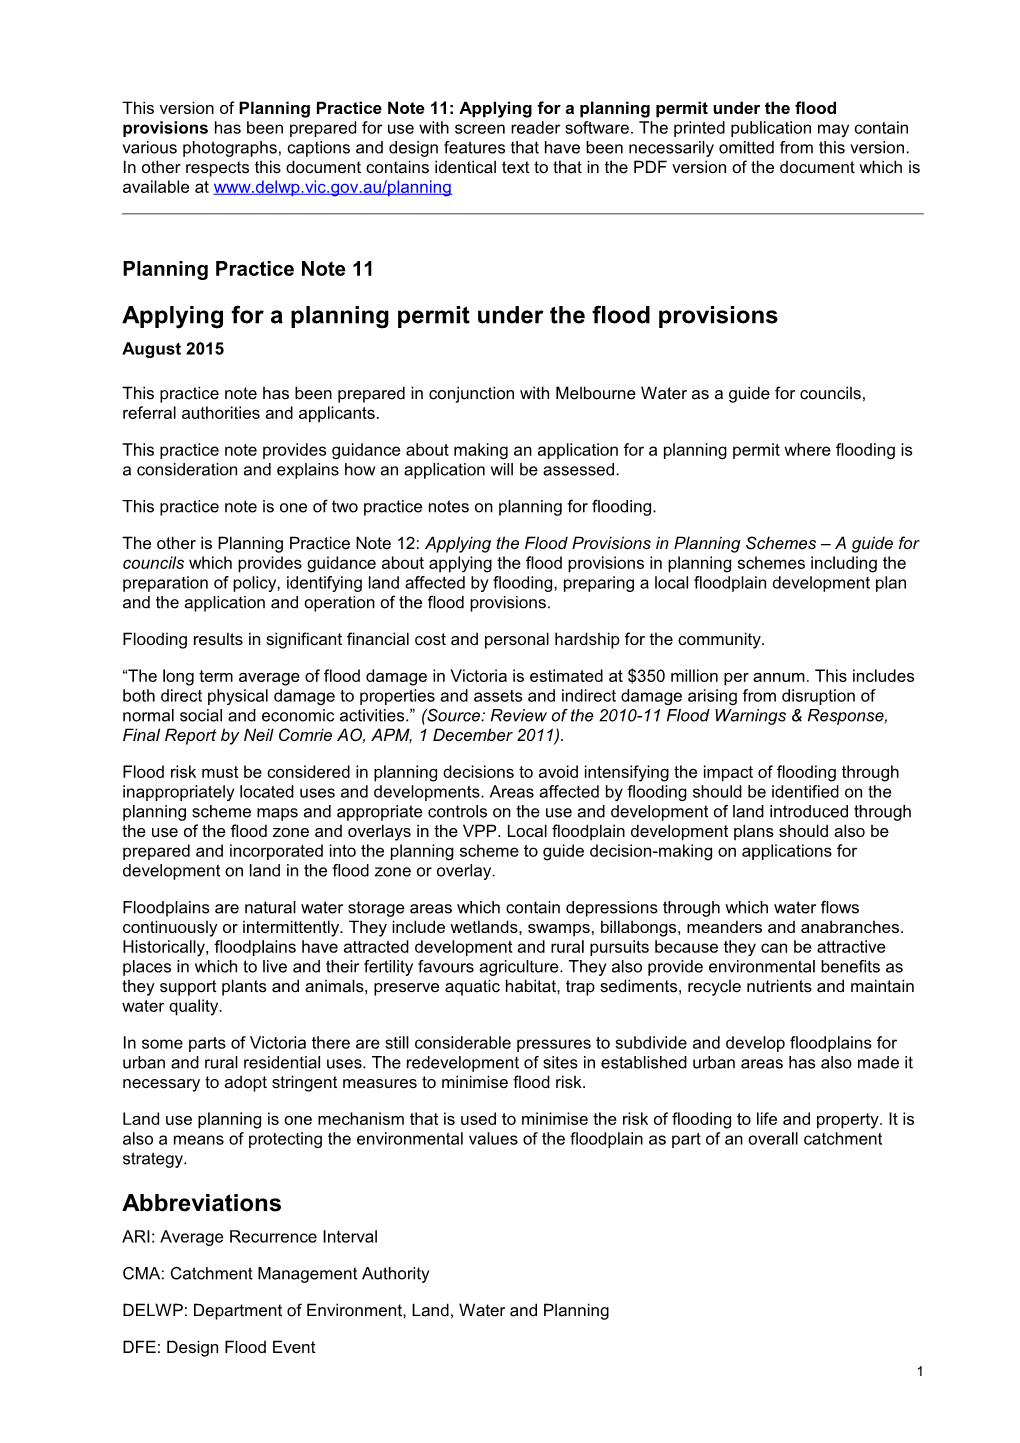 Planning Practice Note 11: Applying for a Planning Permit Under the Flood Provisions